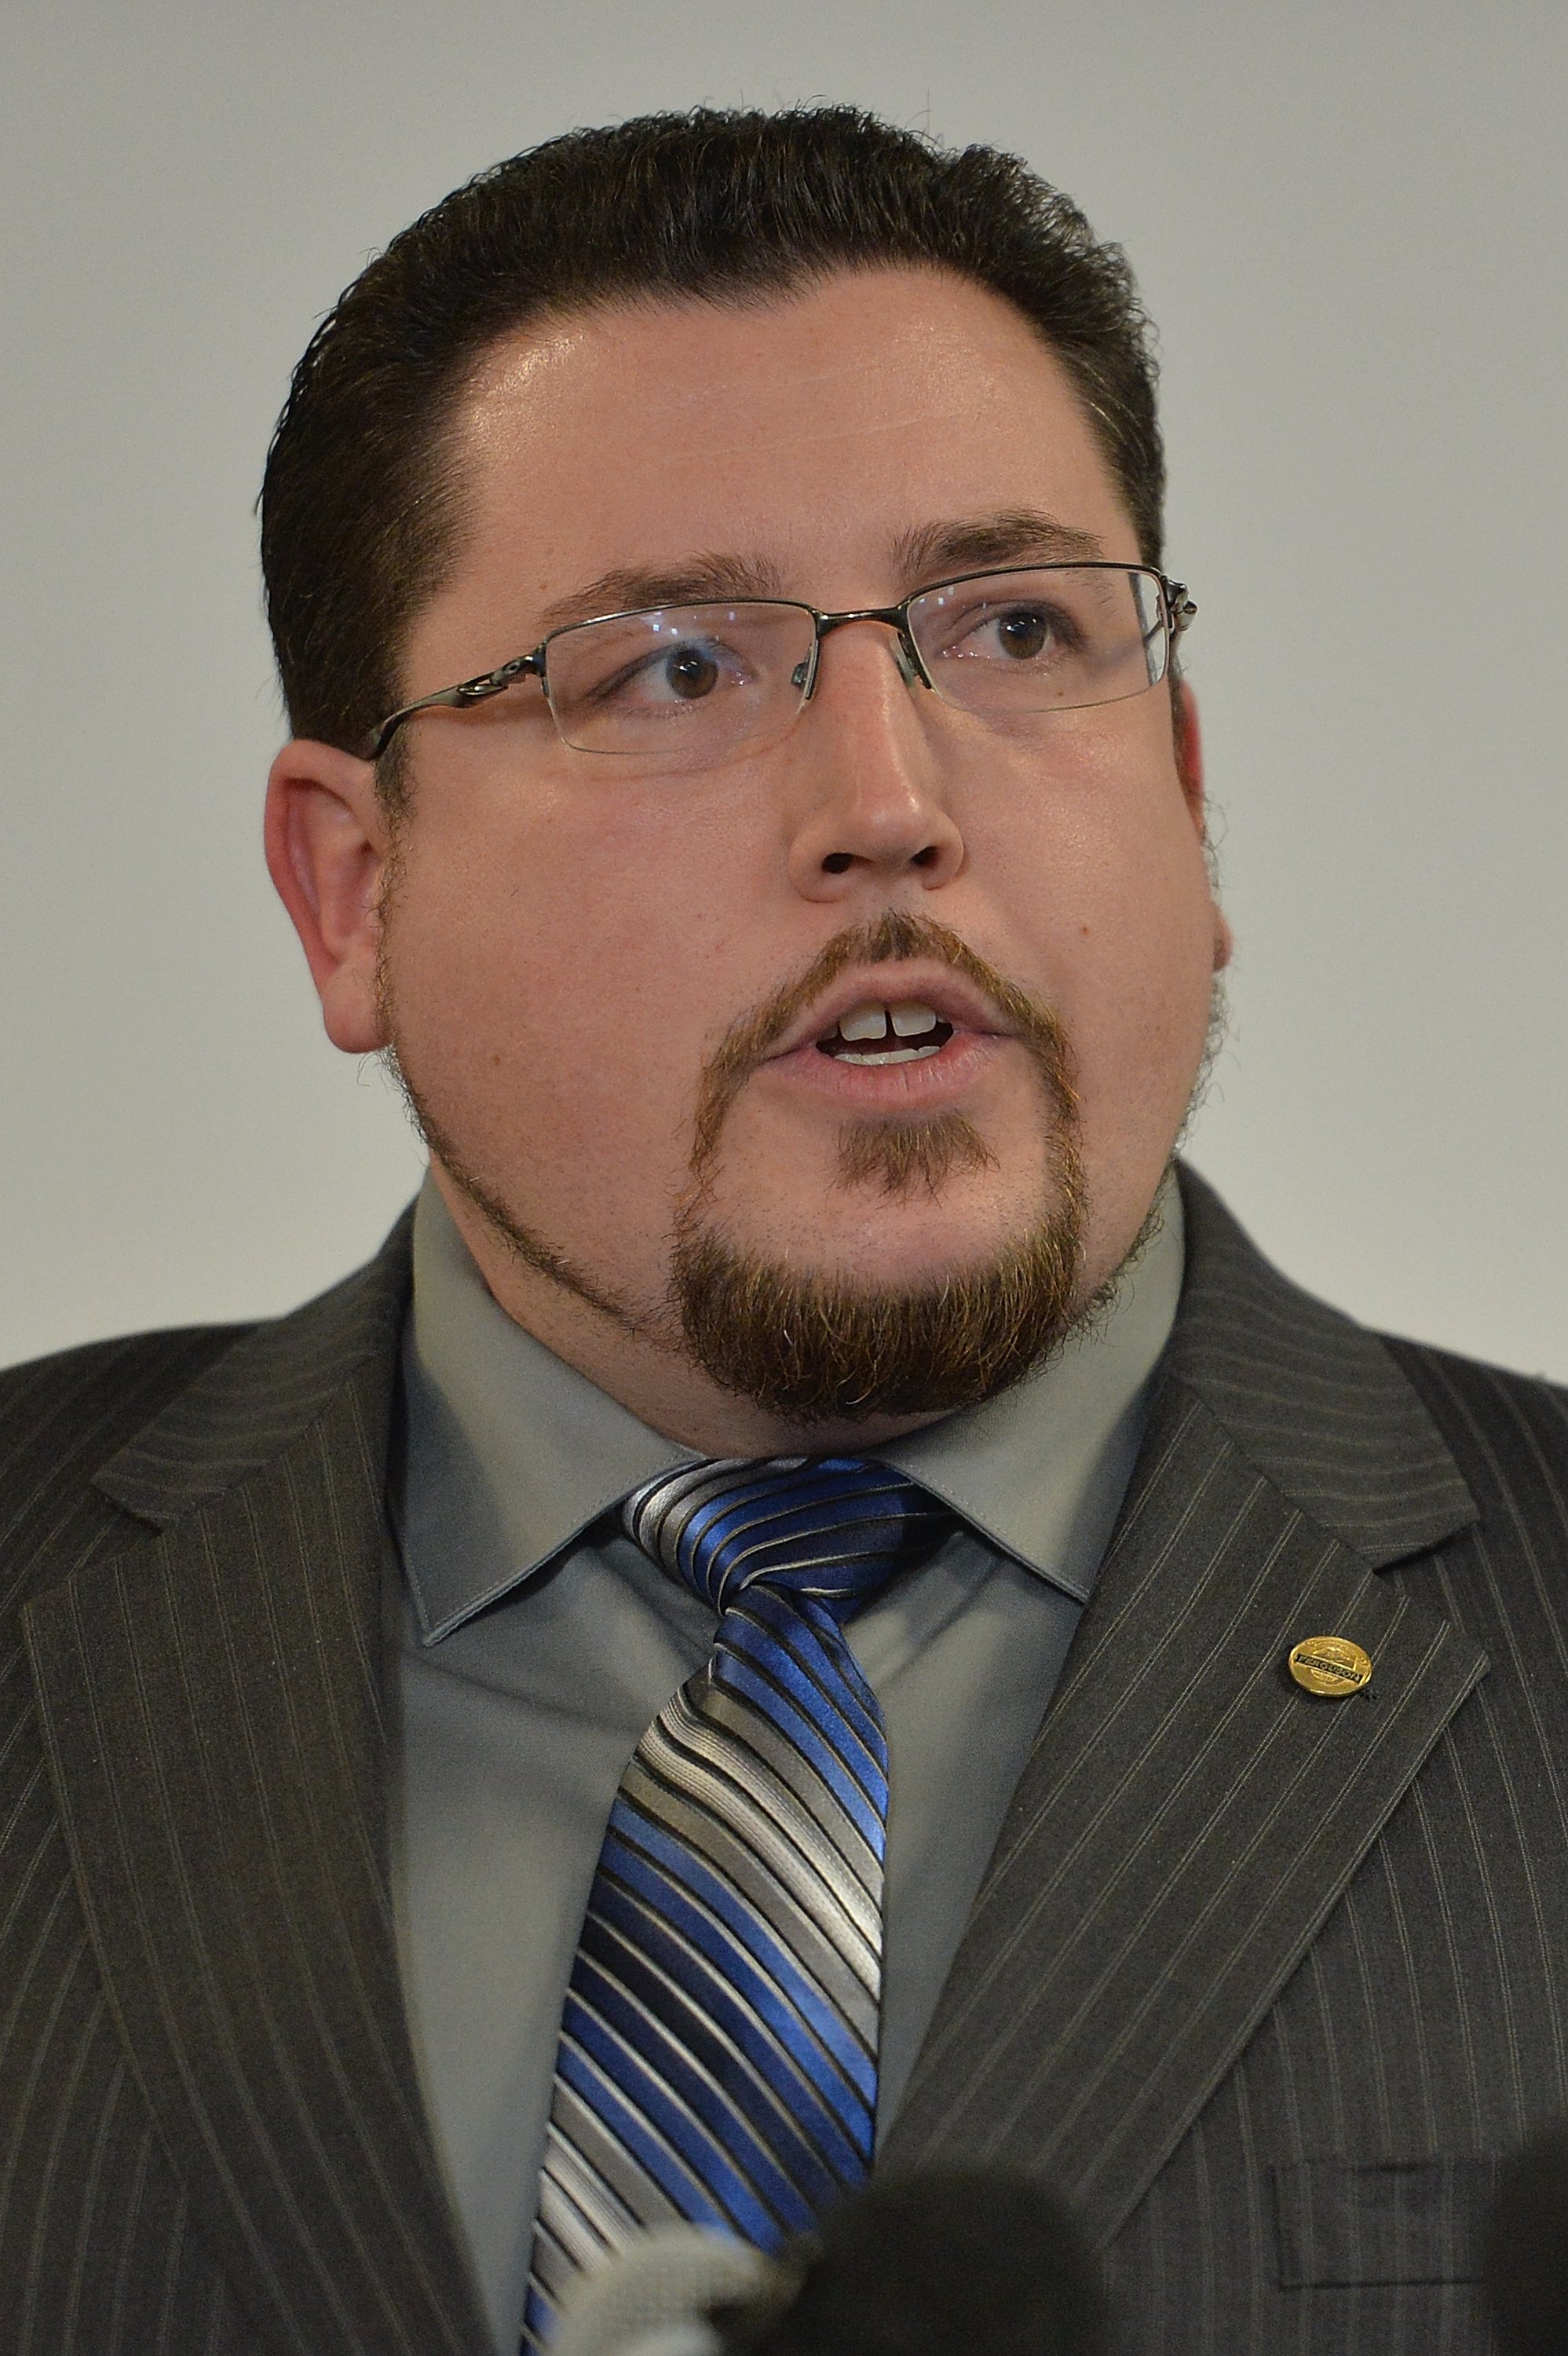 Ferguson Mayor James Knowles speaks at a news conference on the just-released Department of Justice report investigating the city police department on March 4, 2015 in Ferguson.